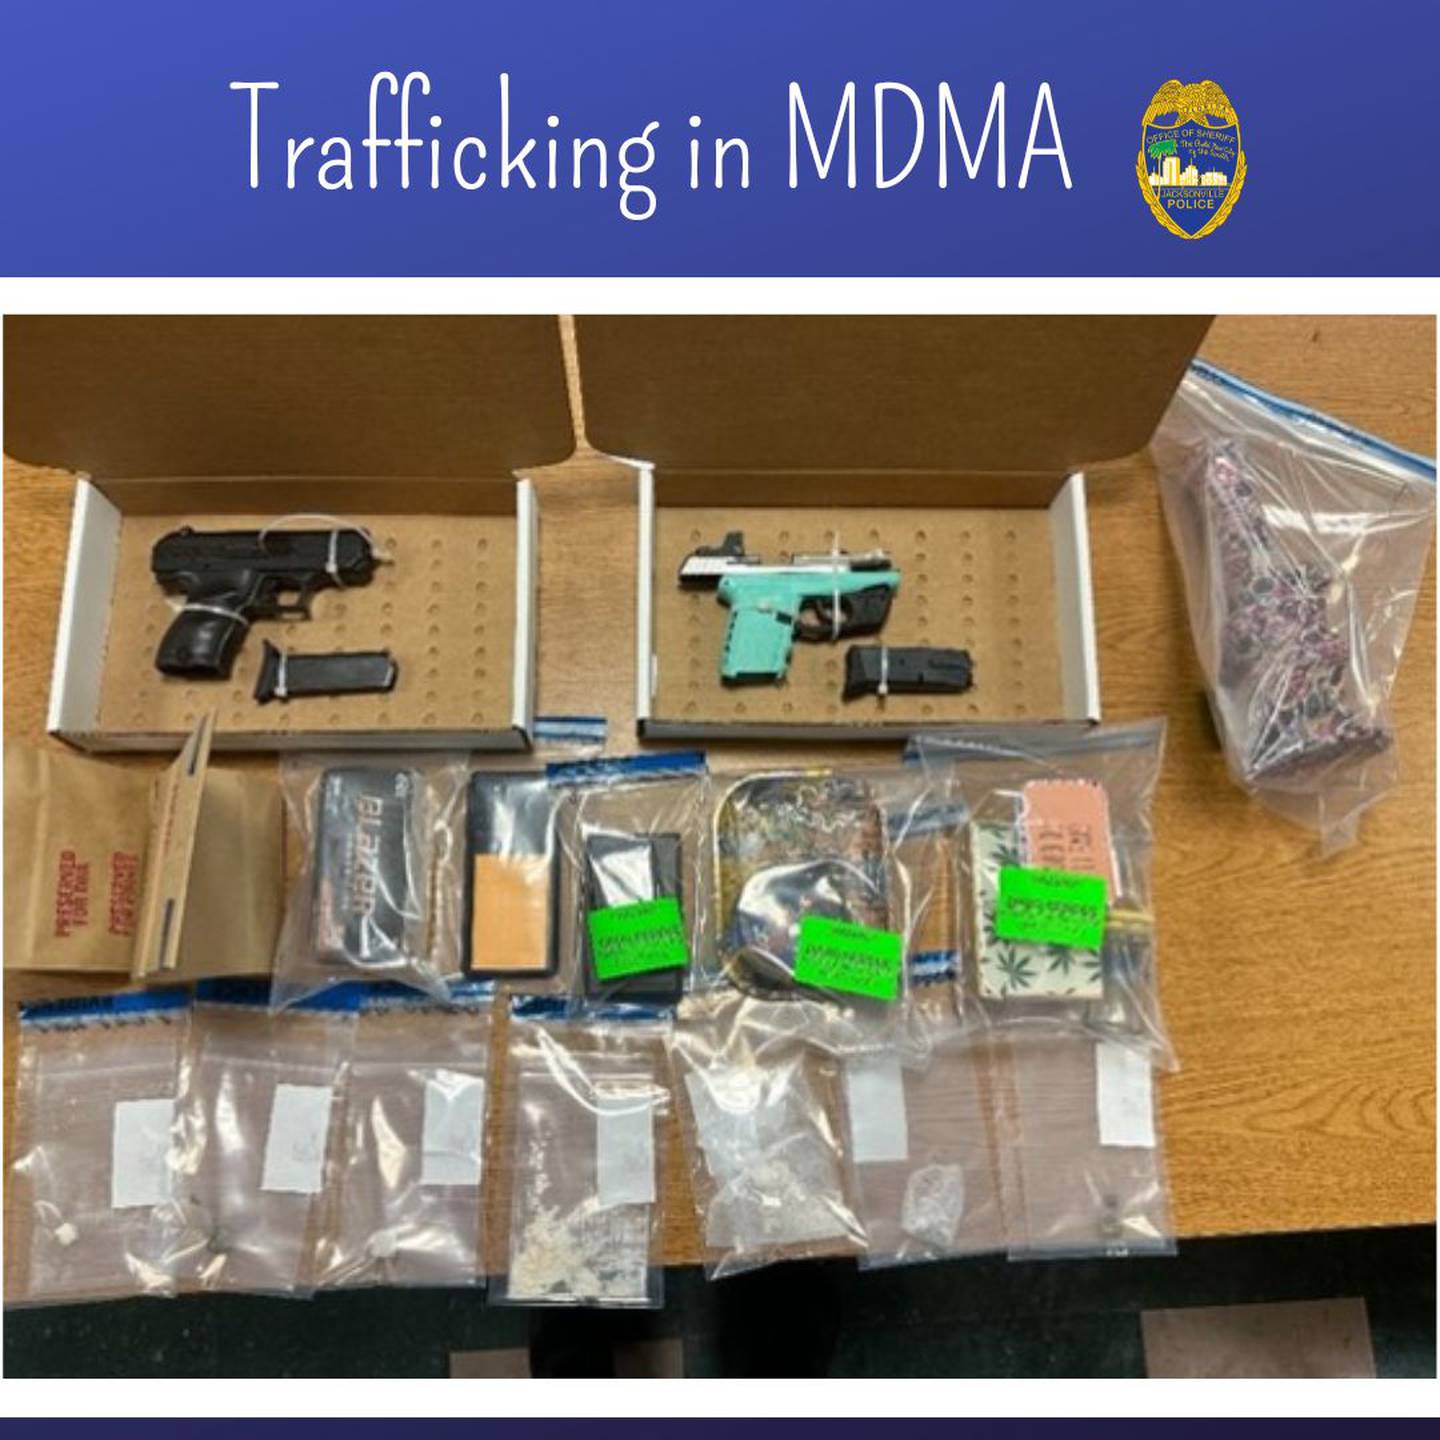 During a traffic stop officers seized two firearms, MDMA, marijuana, and drug paraphernalia.